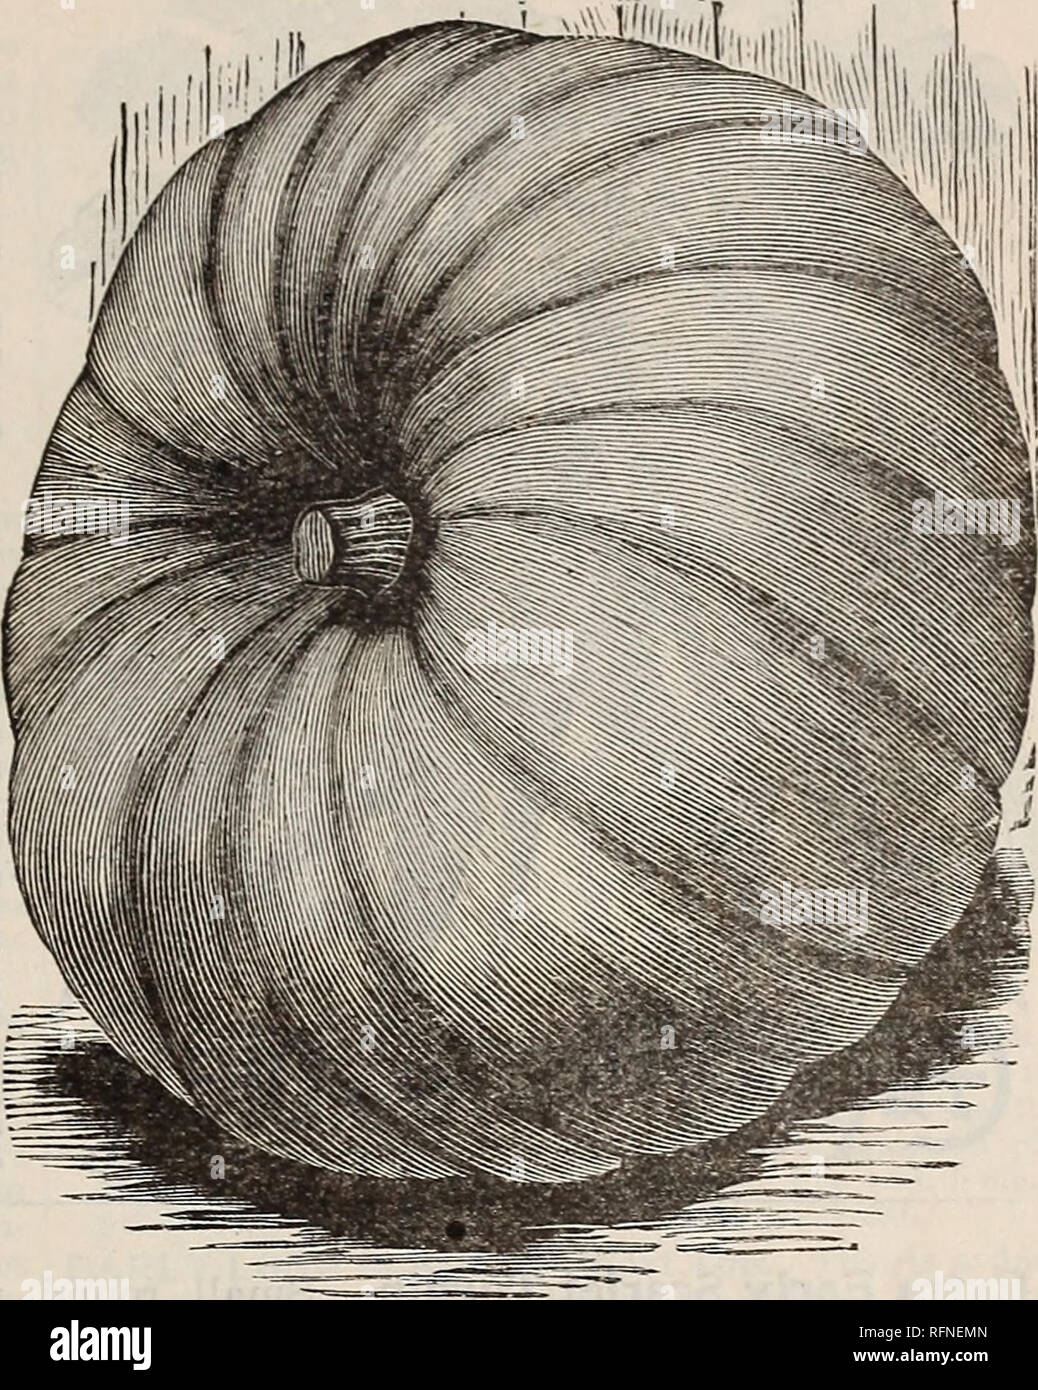 . Burpee's farm annual written at Fordhook Farm. Nurseries (Horticulture) Pennsylvania Philadelphia Catalogs; Vegetables Seeds Catalogs; Plants, Ornamental Catalogs; Flowers Seeds Catalogs. BURPEE'S VEGETABLE SEEDS. 67 THE ORIGINAL GENUINE MAMMOTH PUMPKIN. GENUINE MAMMOTH, or TRUE POTIRON (also called KING OF THE MAMMOTHS, Large Yellow Mammoth, Mammoth $50.00 Pumpkin, and Jumbo Pumpkin). The pride taken in growing the largest pumpkin, and the great demand for the seed, explains the multitude of names which this, the Genuine Mammoth Pumpkin (which we have al- ways sold under its original name), Stock Photo